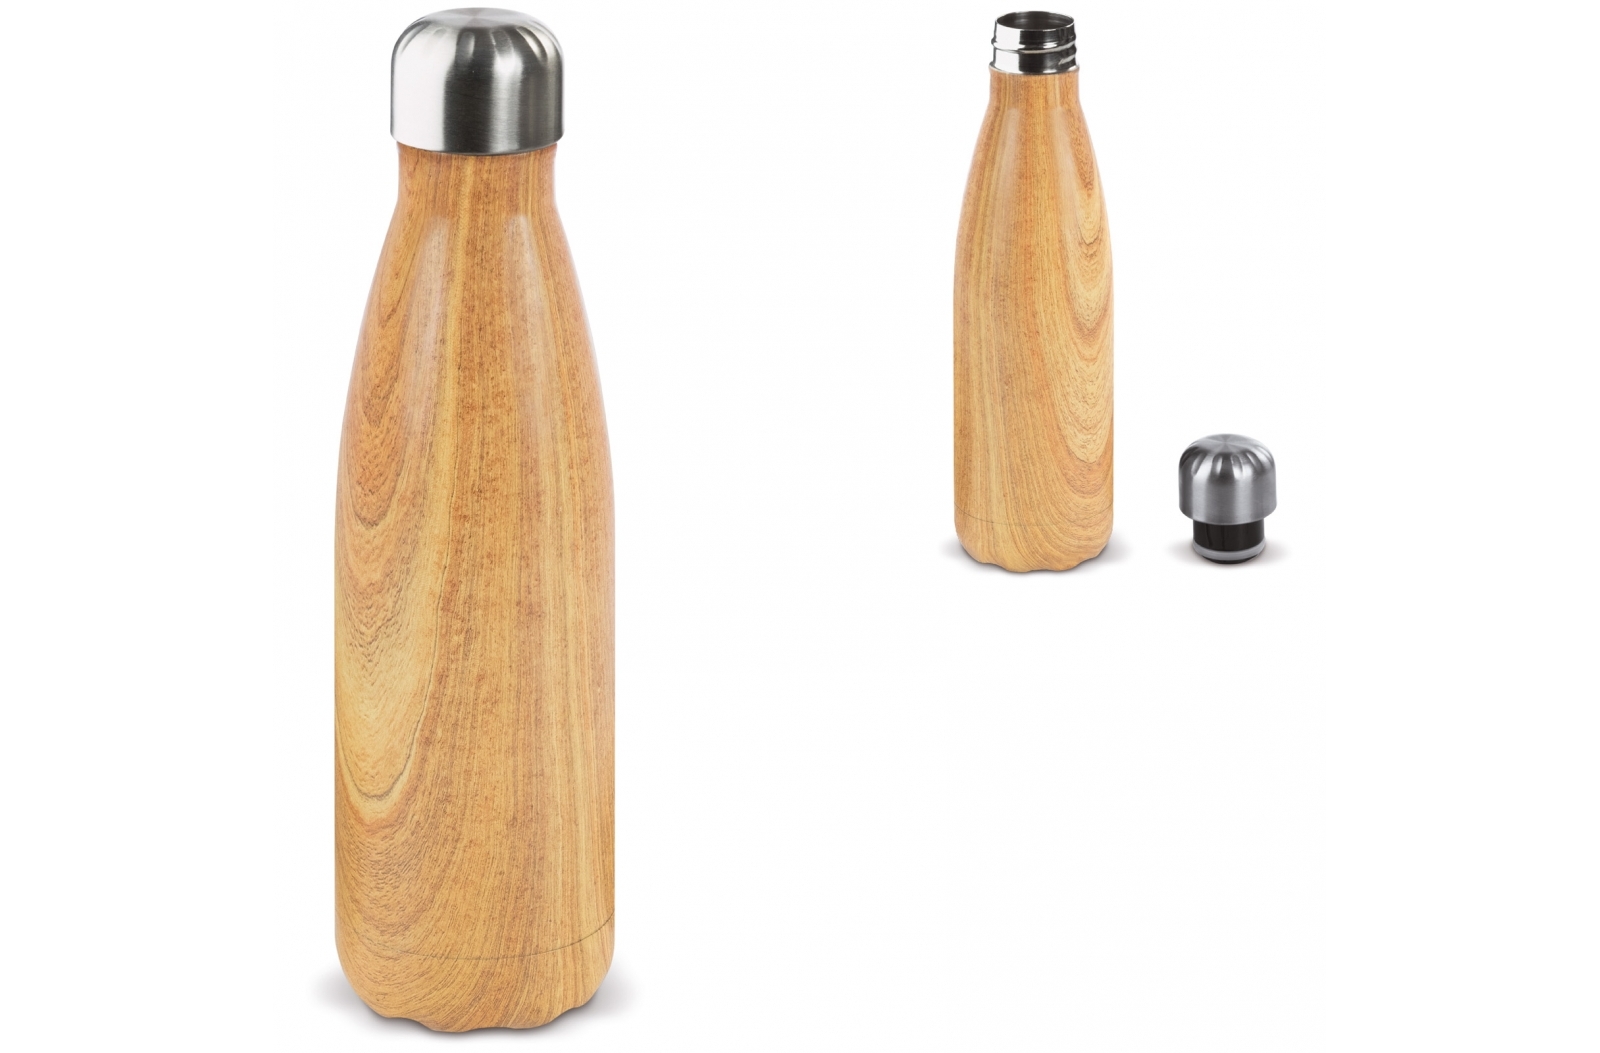 Flasche Swing Holz Edition 500ml